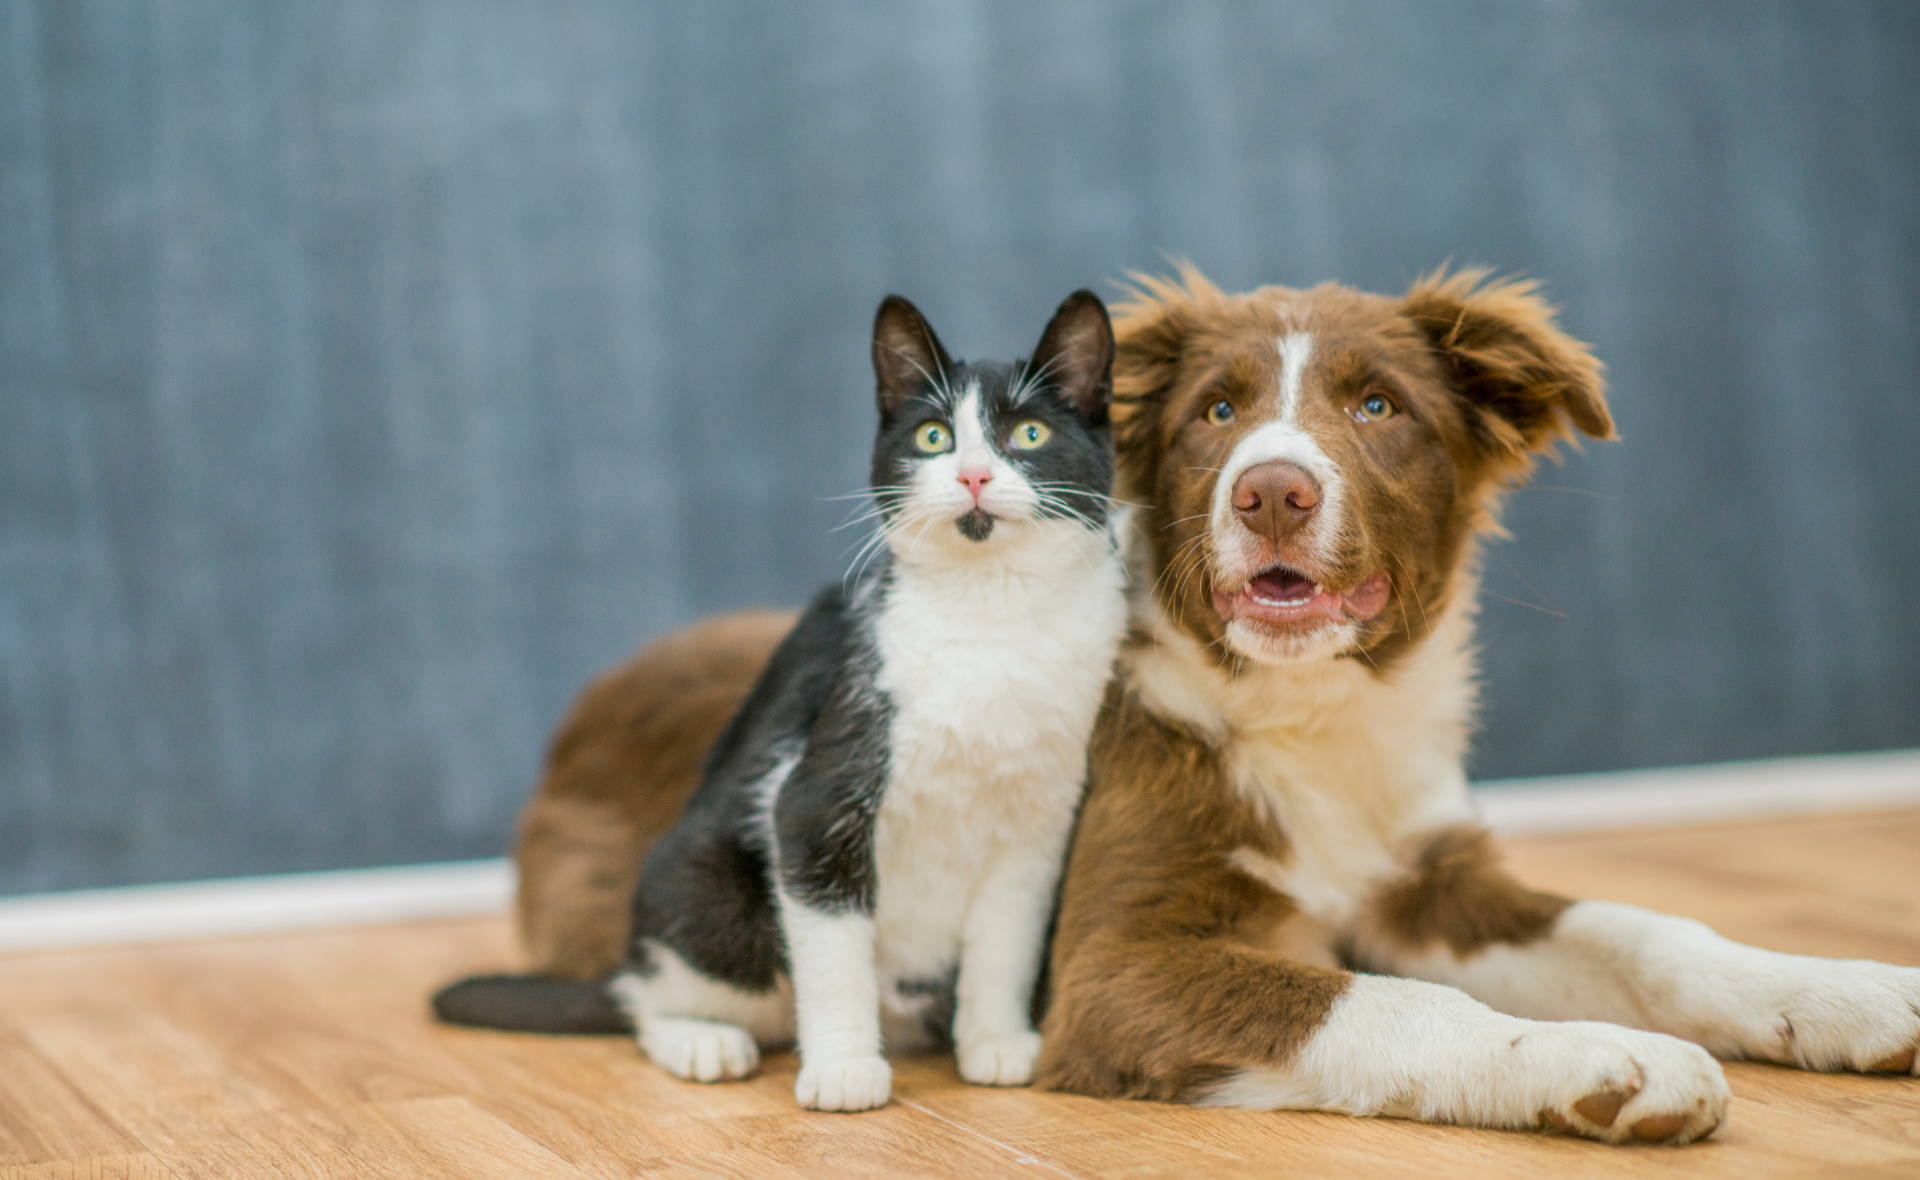 Cat and dog together. Learn your pet cues to make smooth introductions